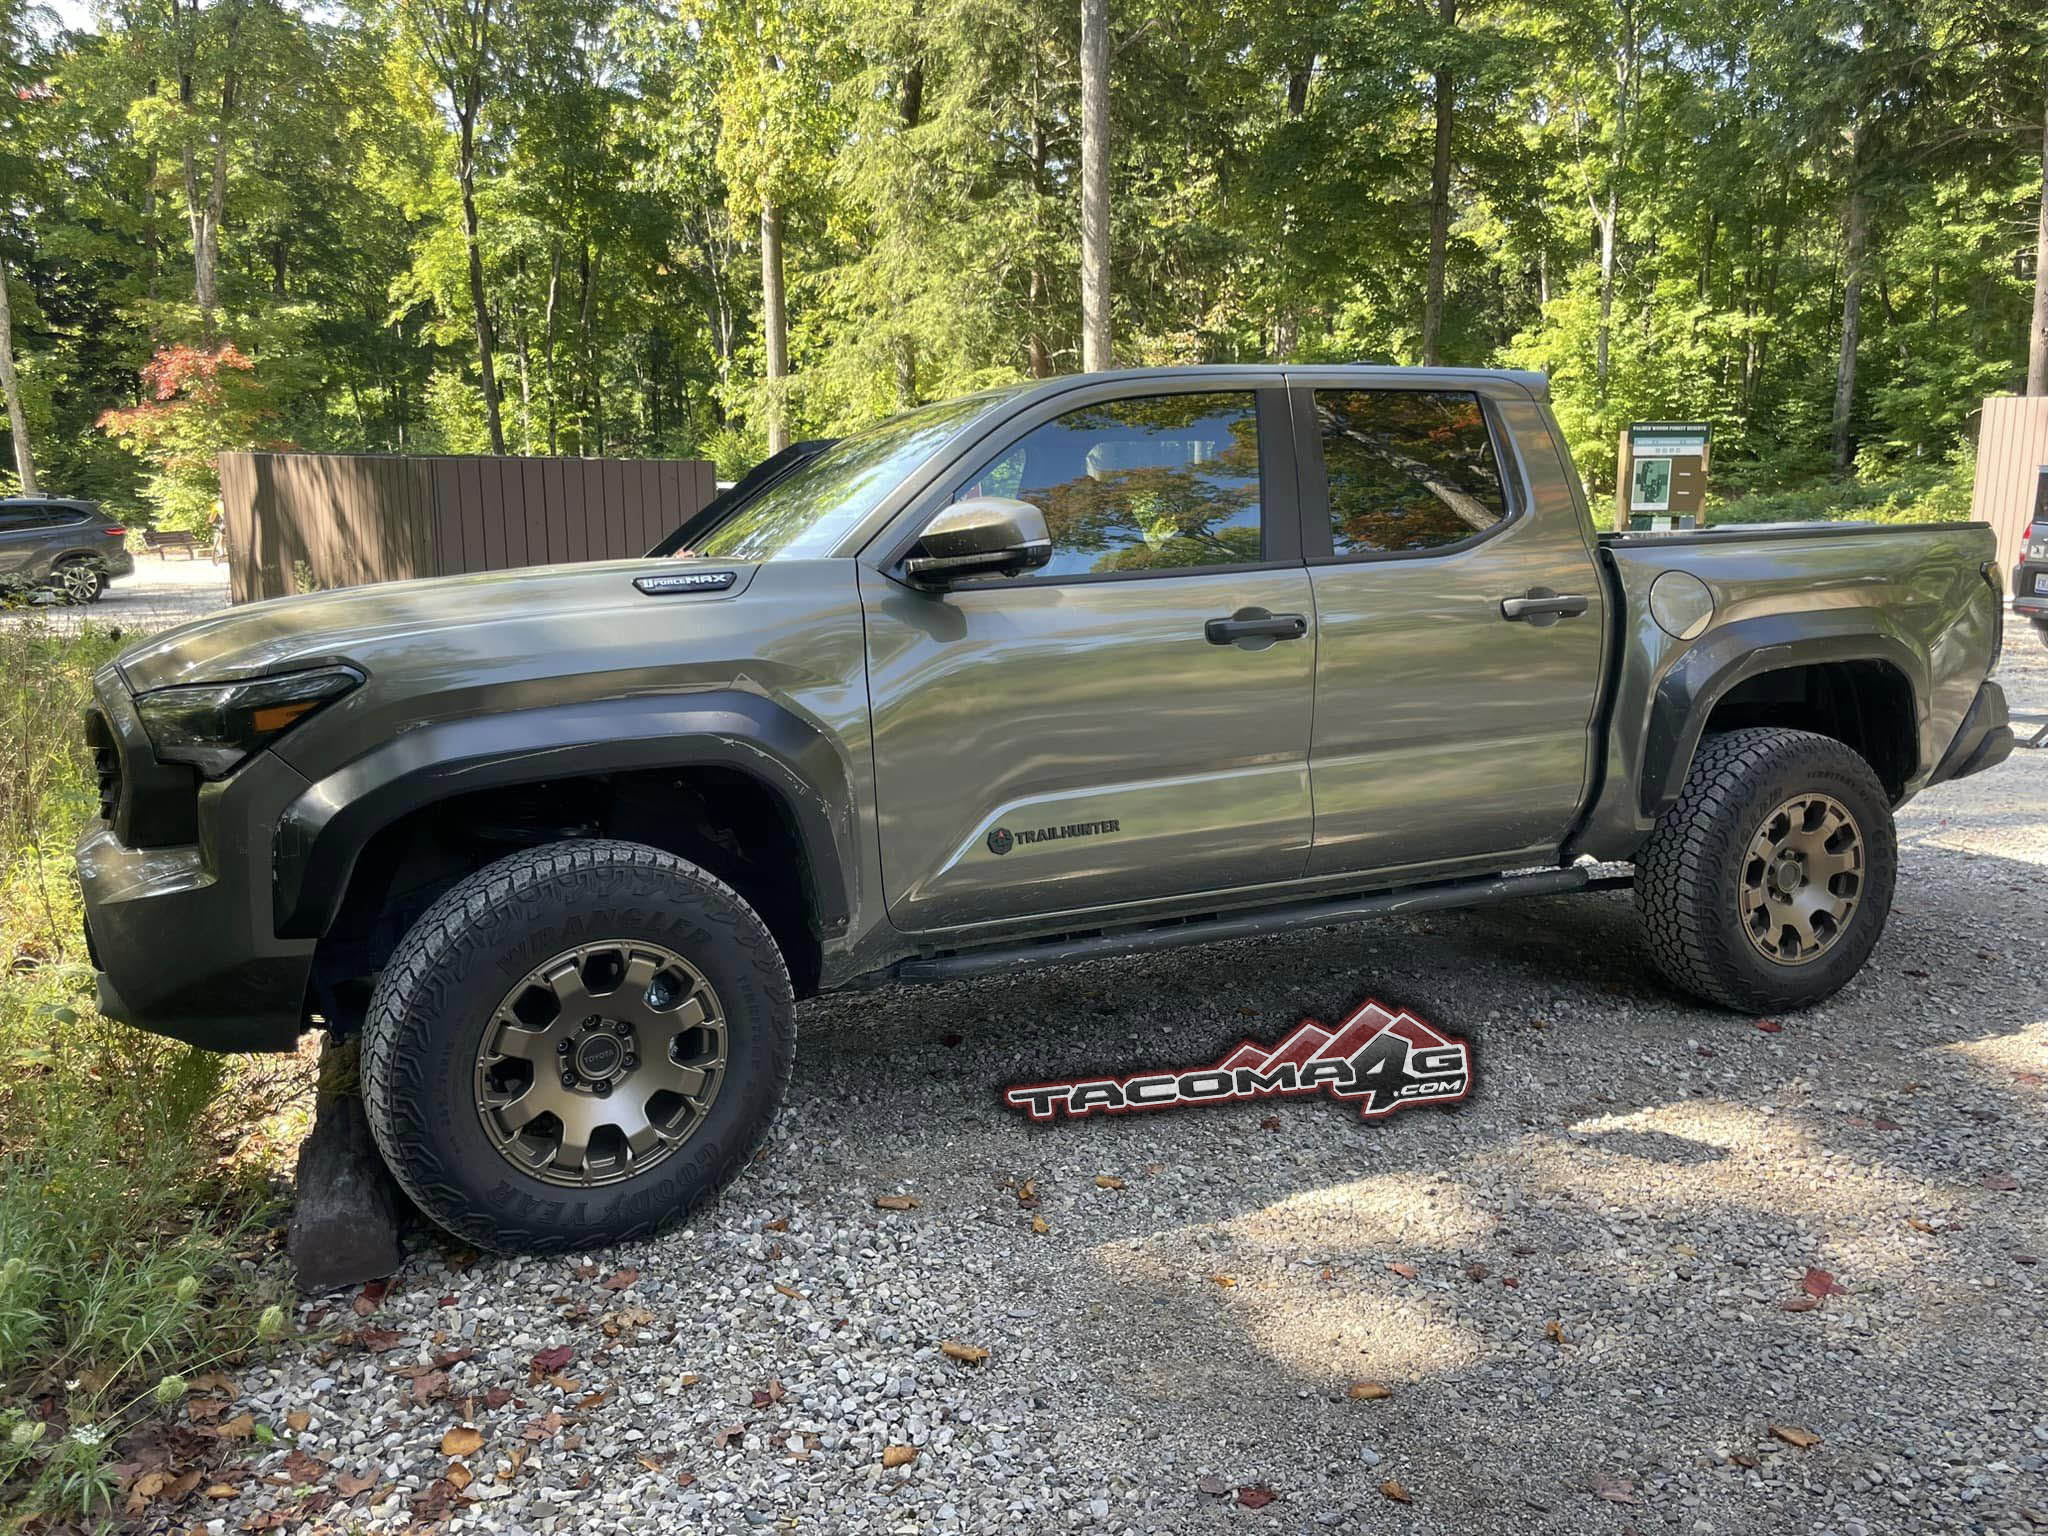 2024 Tacoma 2024 Tacoma TRAILHUNTER - Specs, Price (TBA) Features, Photos & Videos 5 foot Short Bed 2024 Toyota Tacoma Trail hunter Bronze Oxide 3